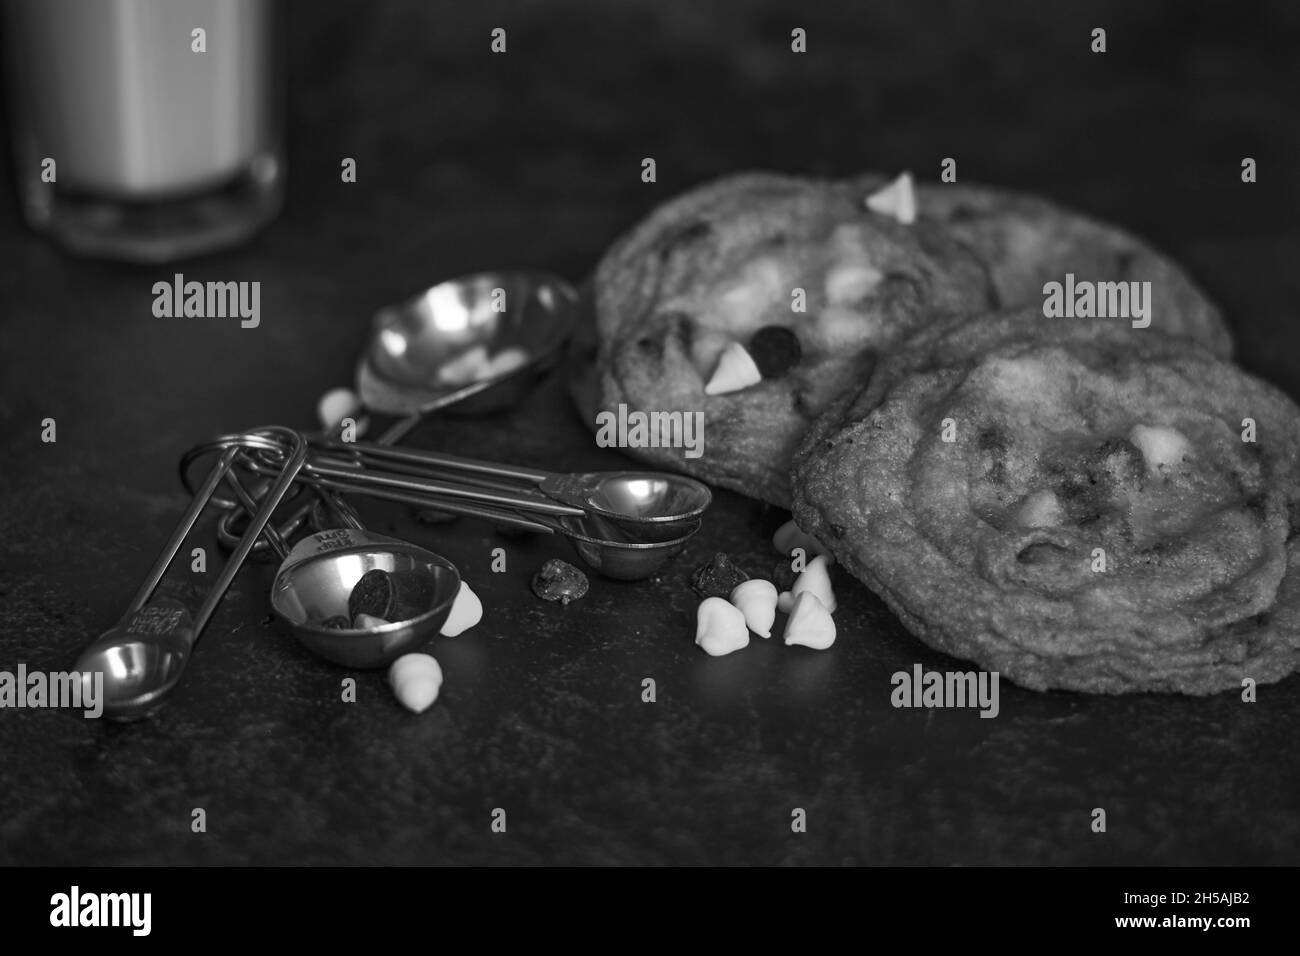 Closeup shot of chocolate chips cookies, measuring spoons, and a glass of milk in a grayscale Stock Photo